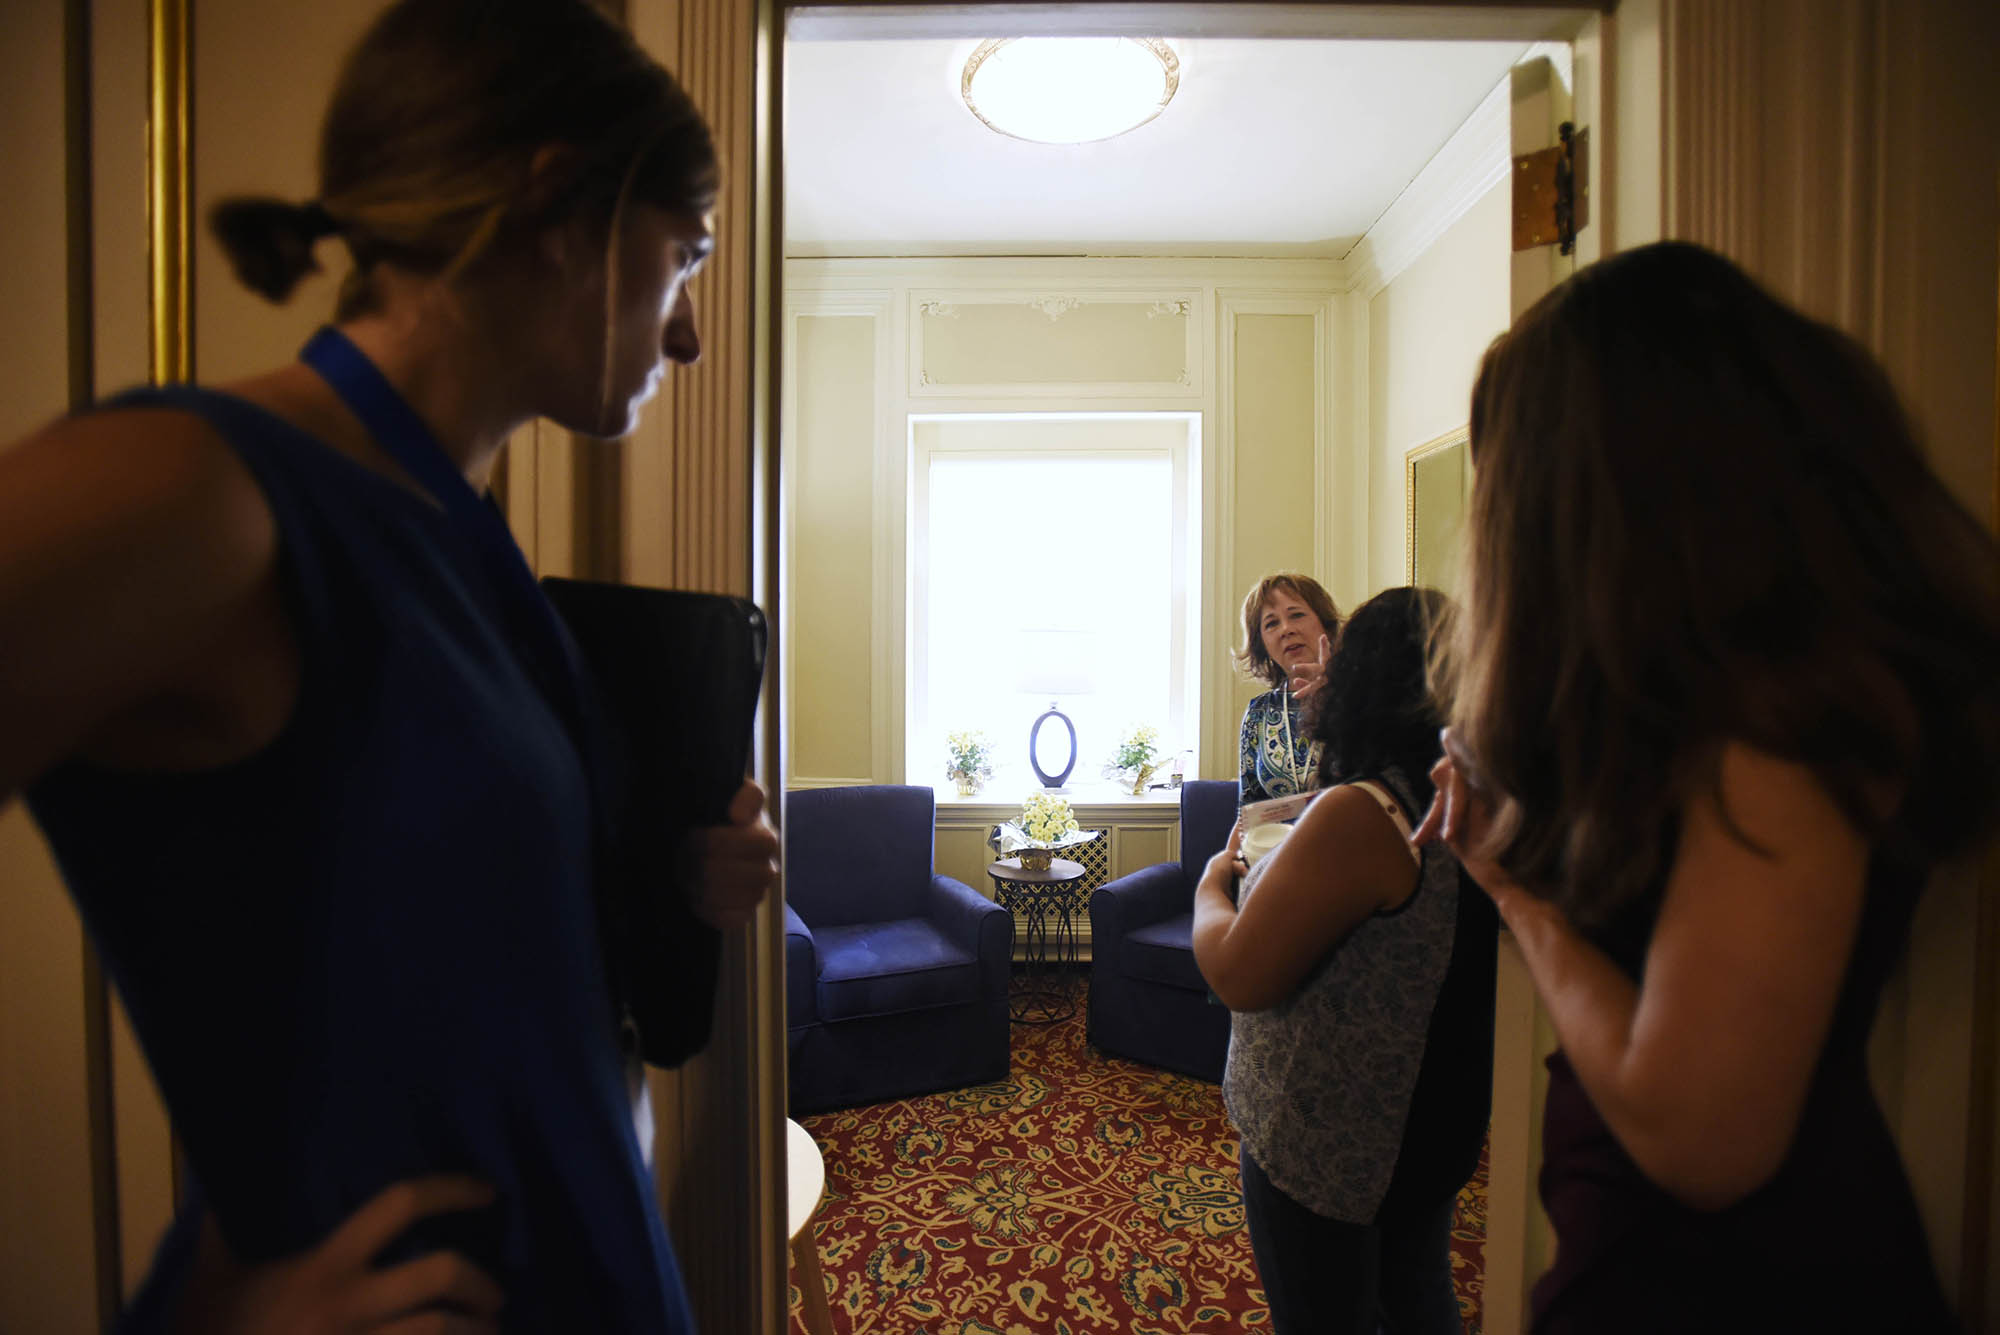 Senior director of corporate relations at Proctors Sabrina Heilmann, center, shows attendees the new lactation room for patron and employee nursing mothers during a press conference at Proctors Monday, September 18, 2017. The space is sponsored and made possible by St. Peter's Health Partners.